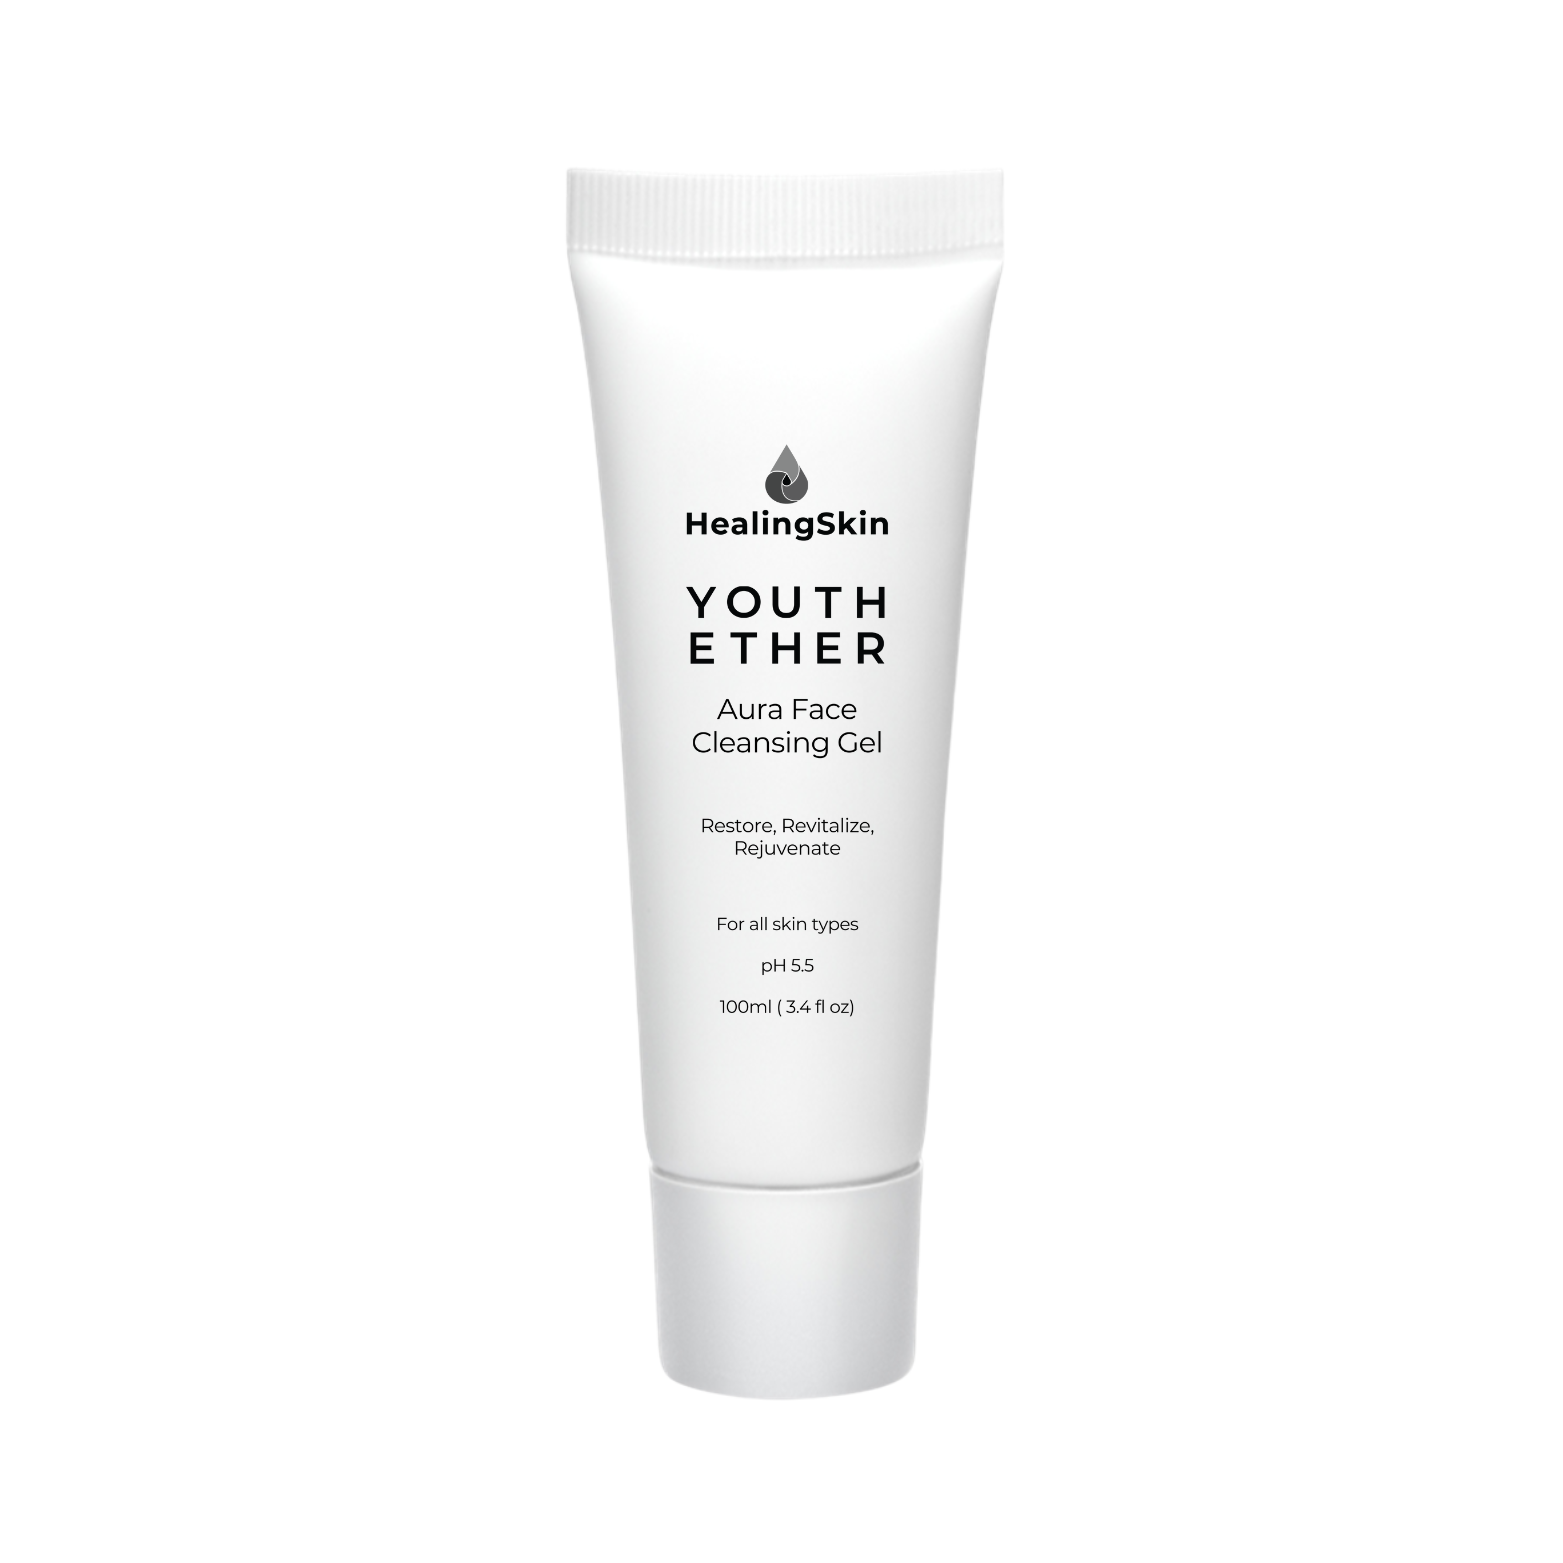 Youth Ether Aura Face Cleansing Gel